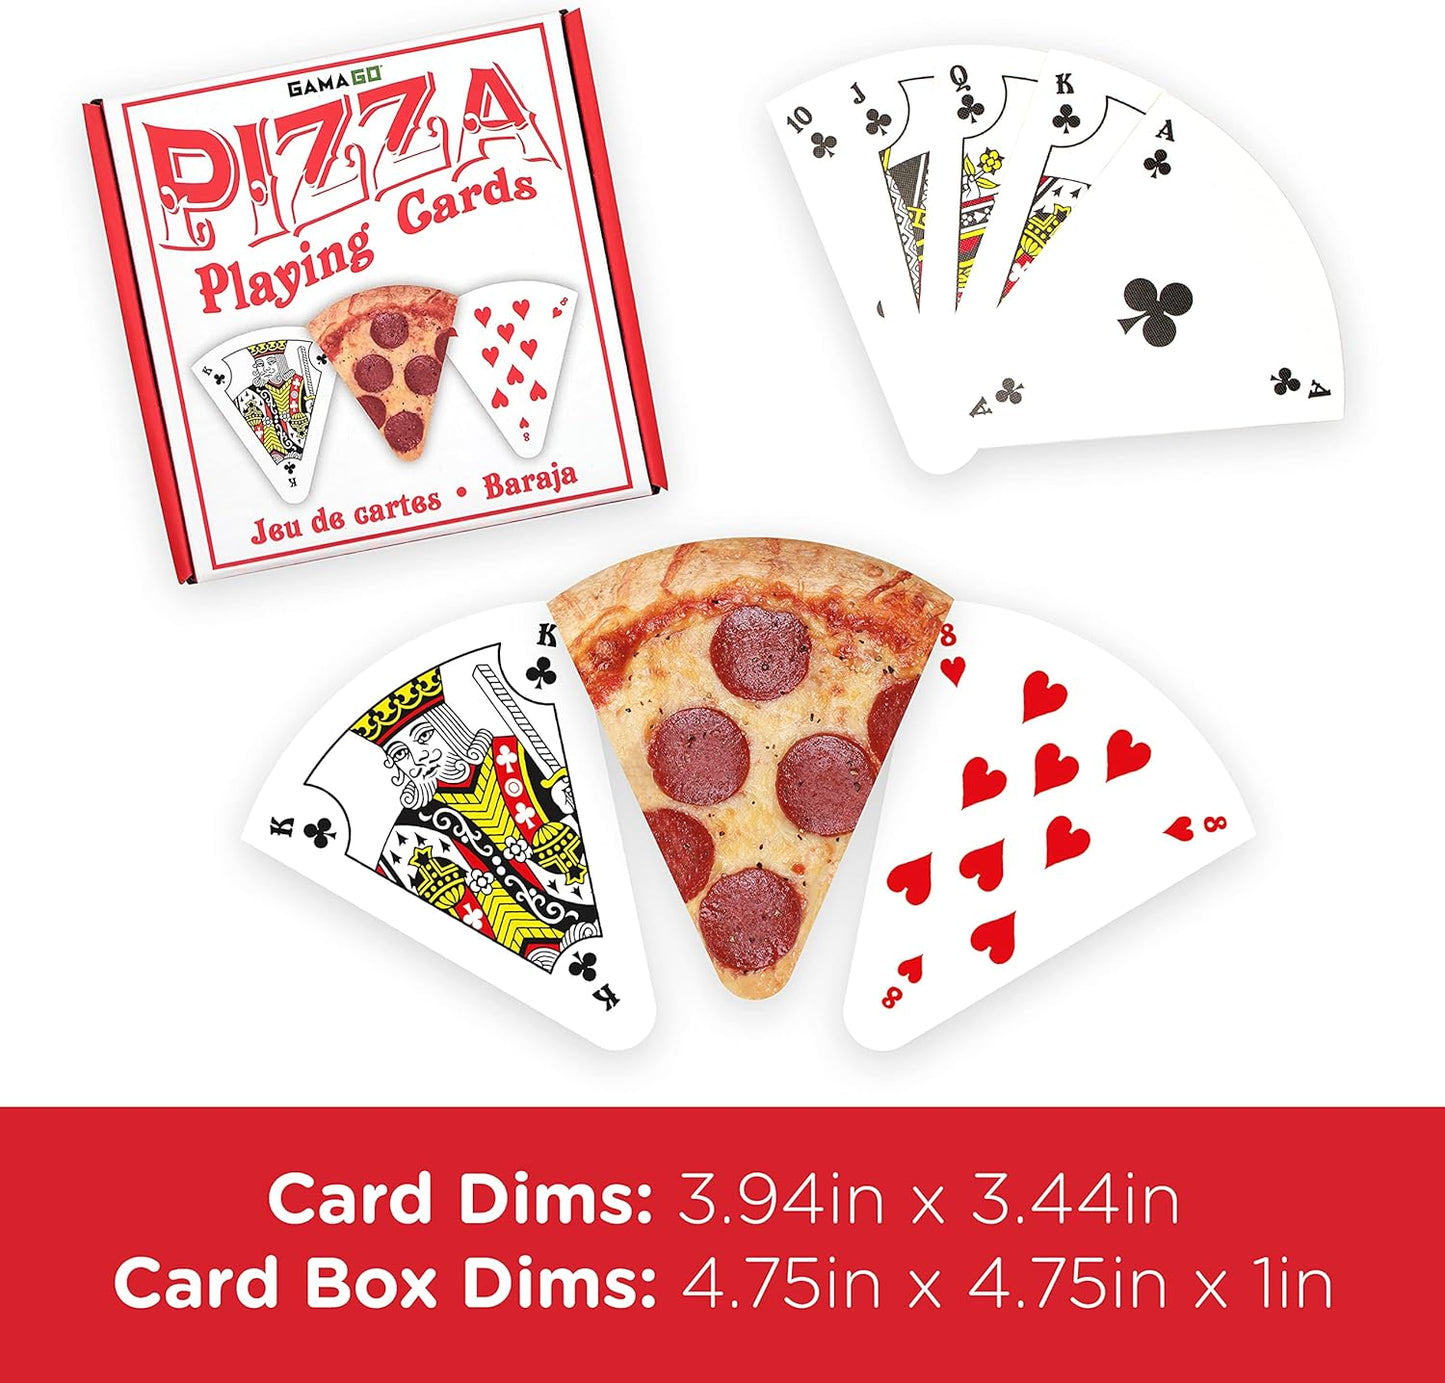 PIZZA - PLAYING CARDS